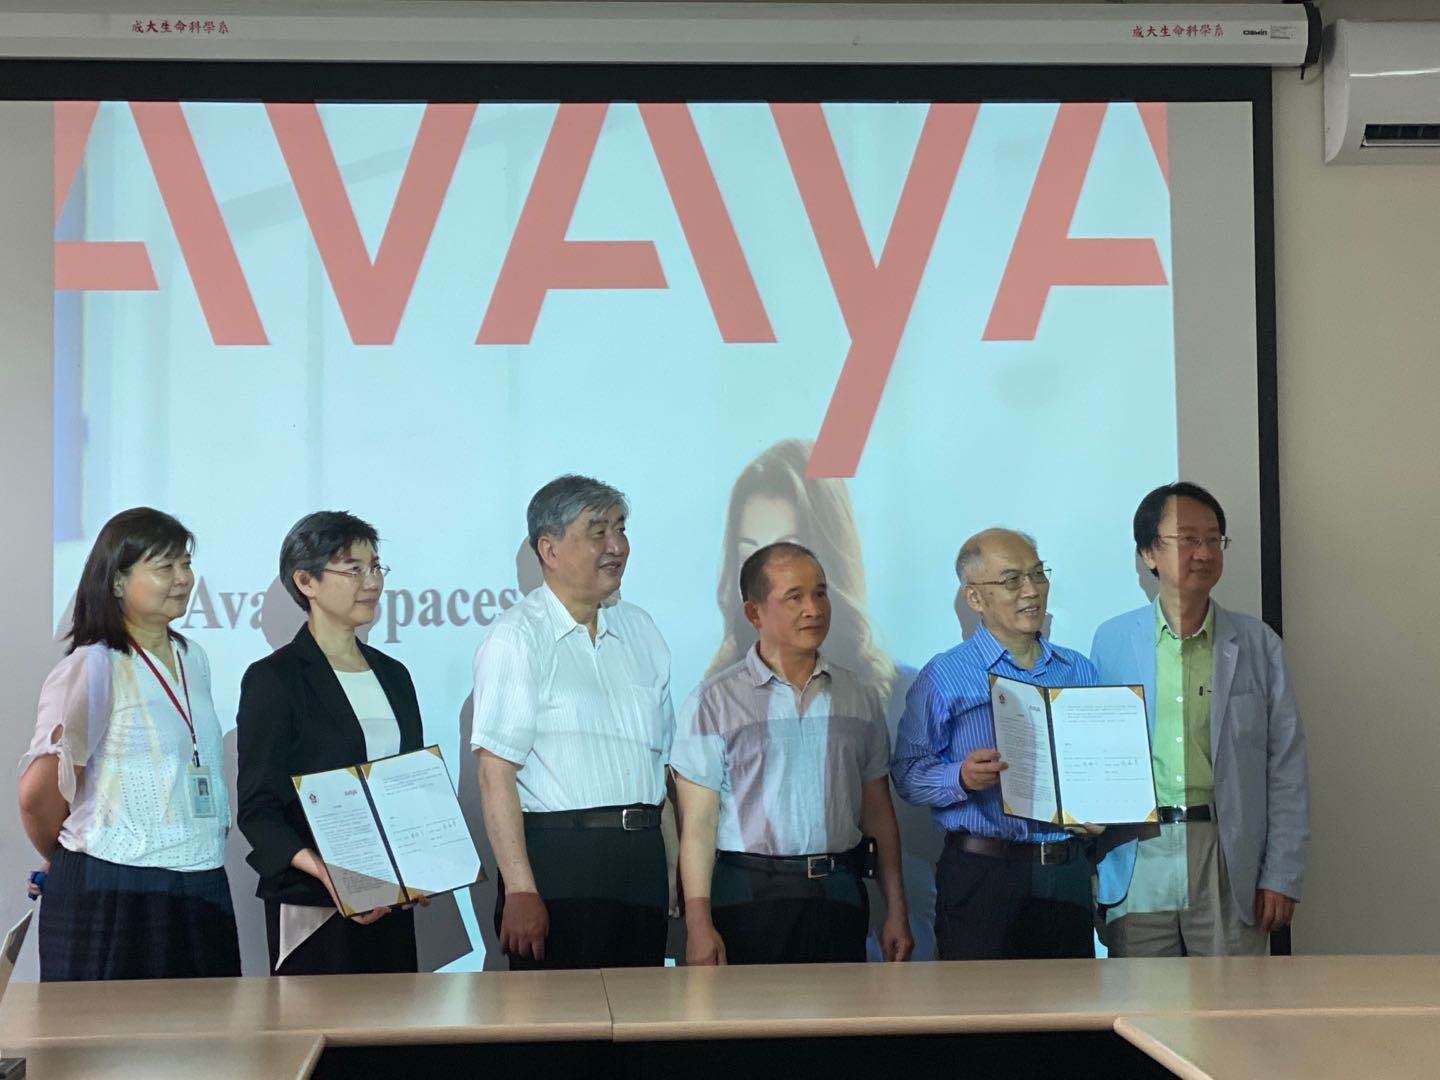 Six people stood together. Two of them are holding up certificates.